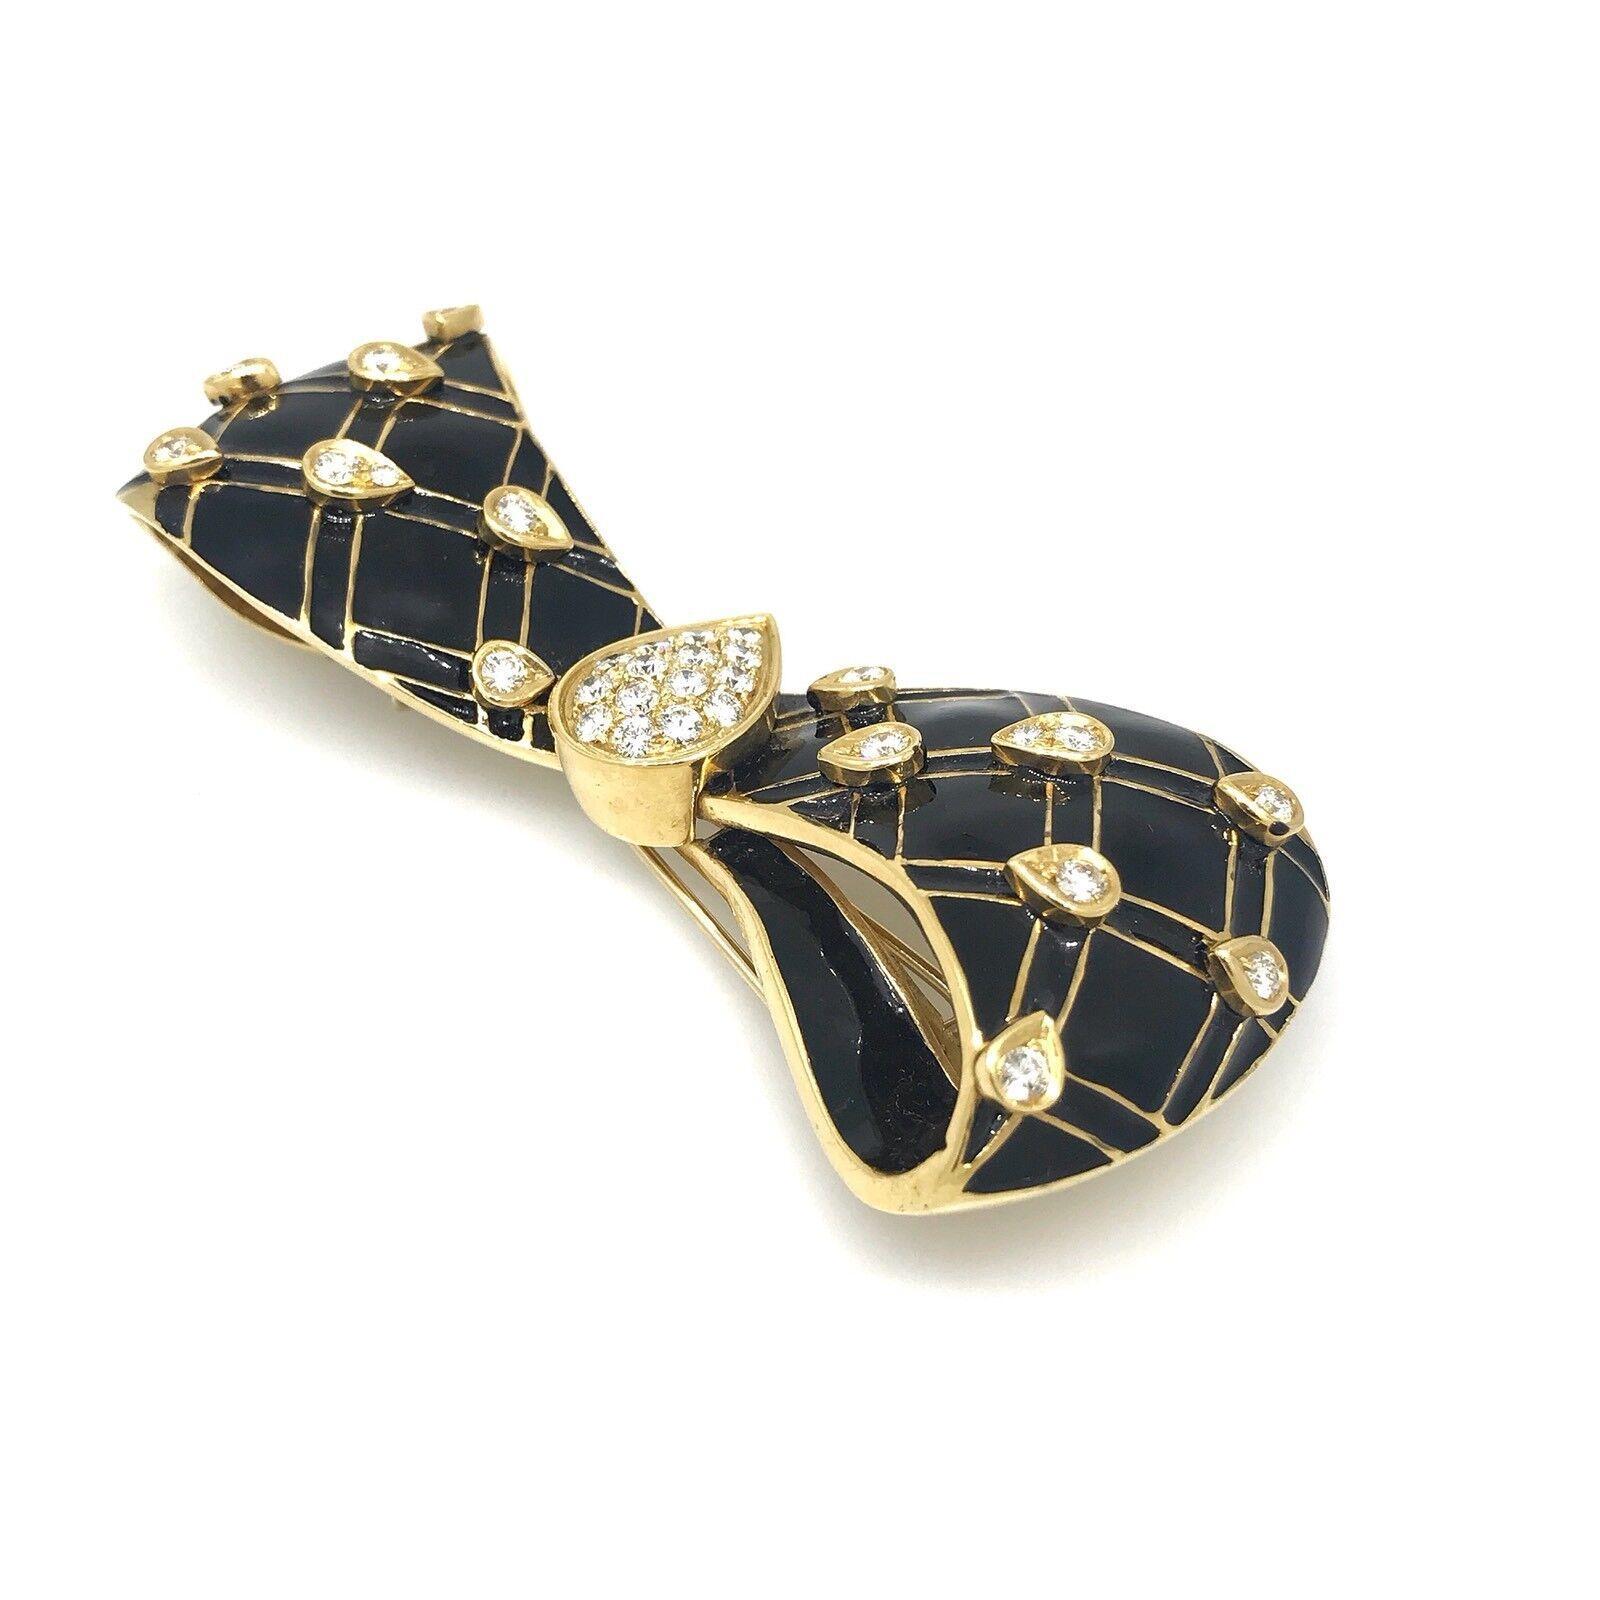 Large Black Enamel and Diamond Bow Pin / Brooch in 18k Yellow Gold In Excellent Condition For Sale In La Jolla, CA